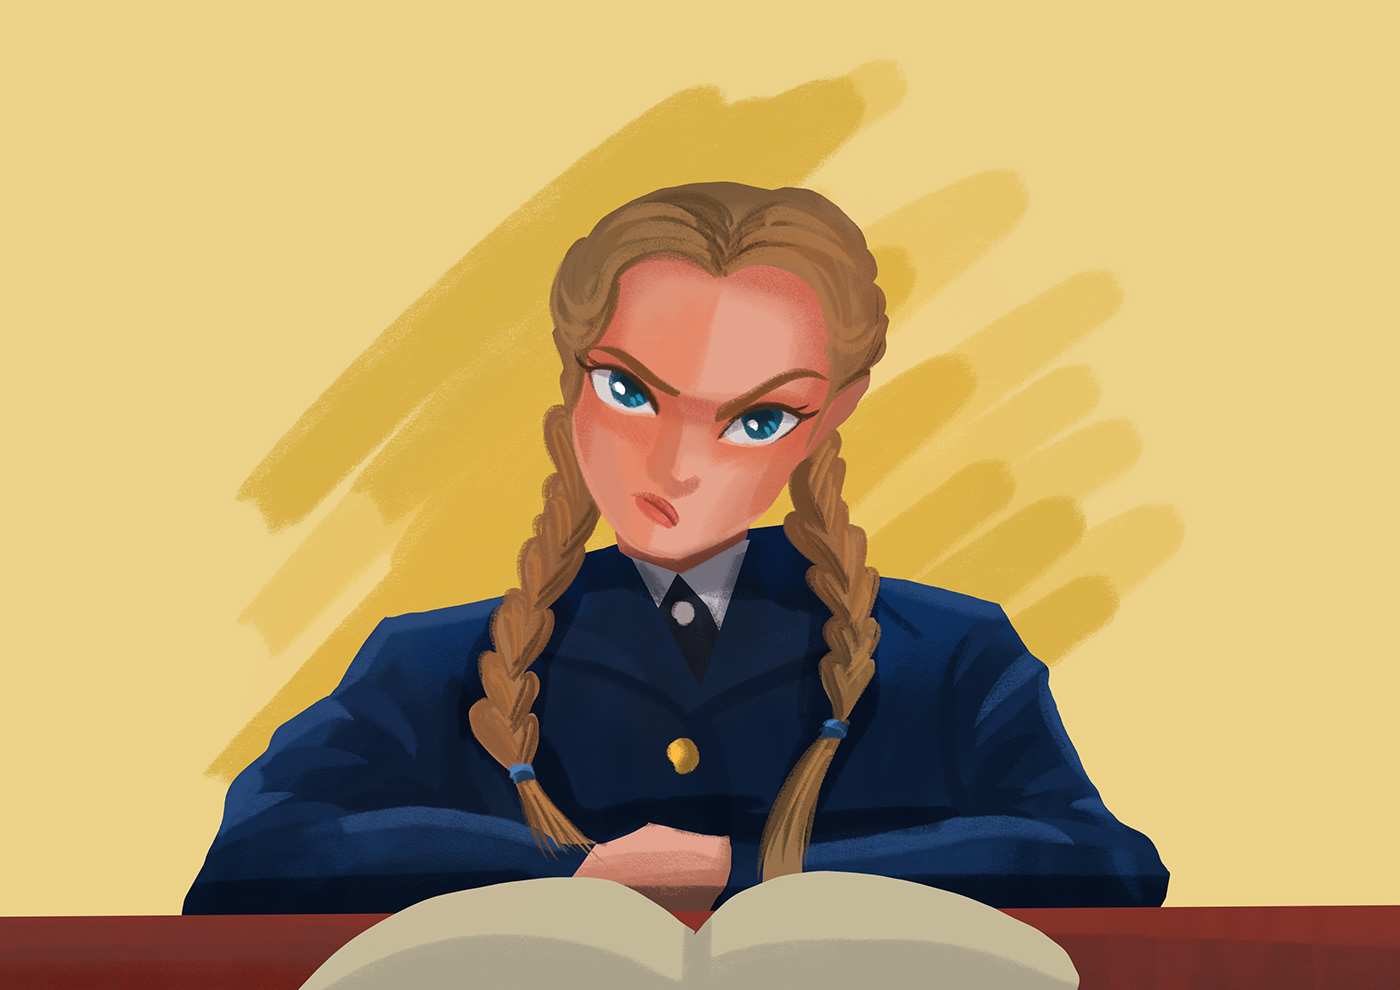 Fanart of Paris Geller, with her fierce character and yellow background